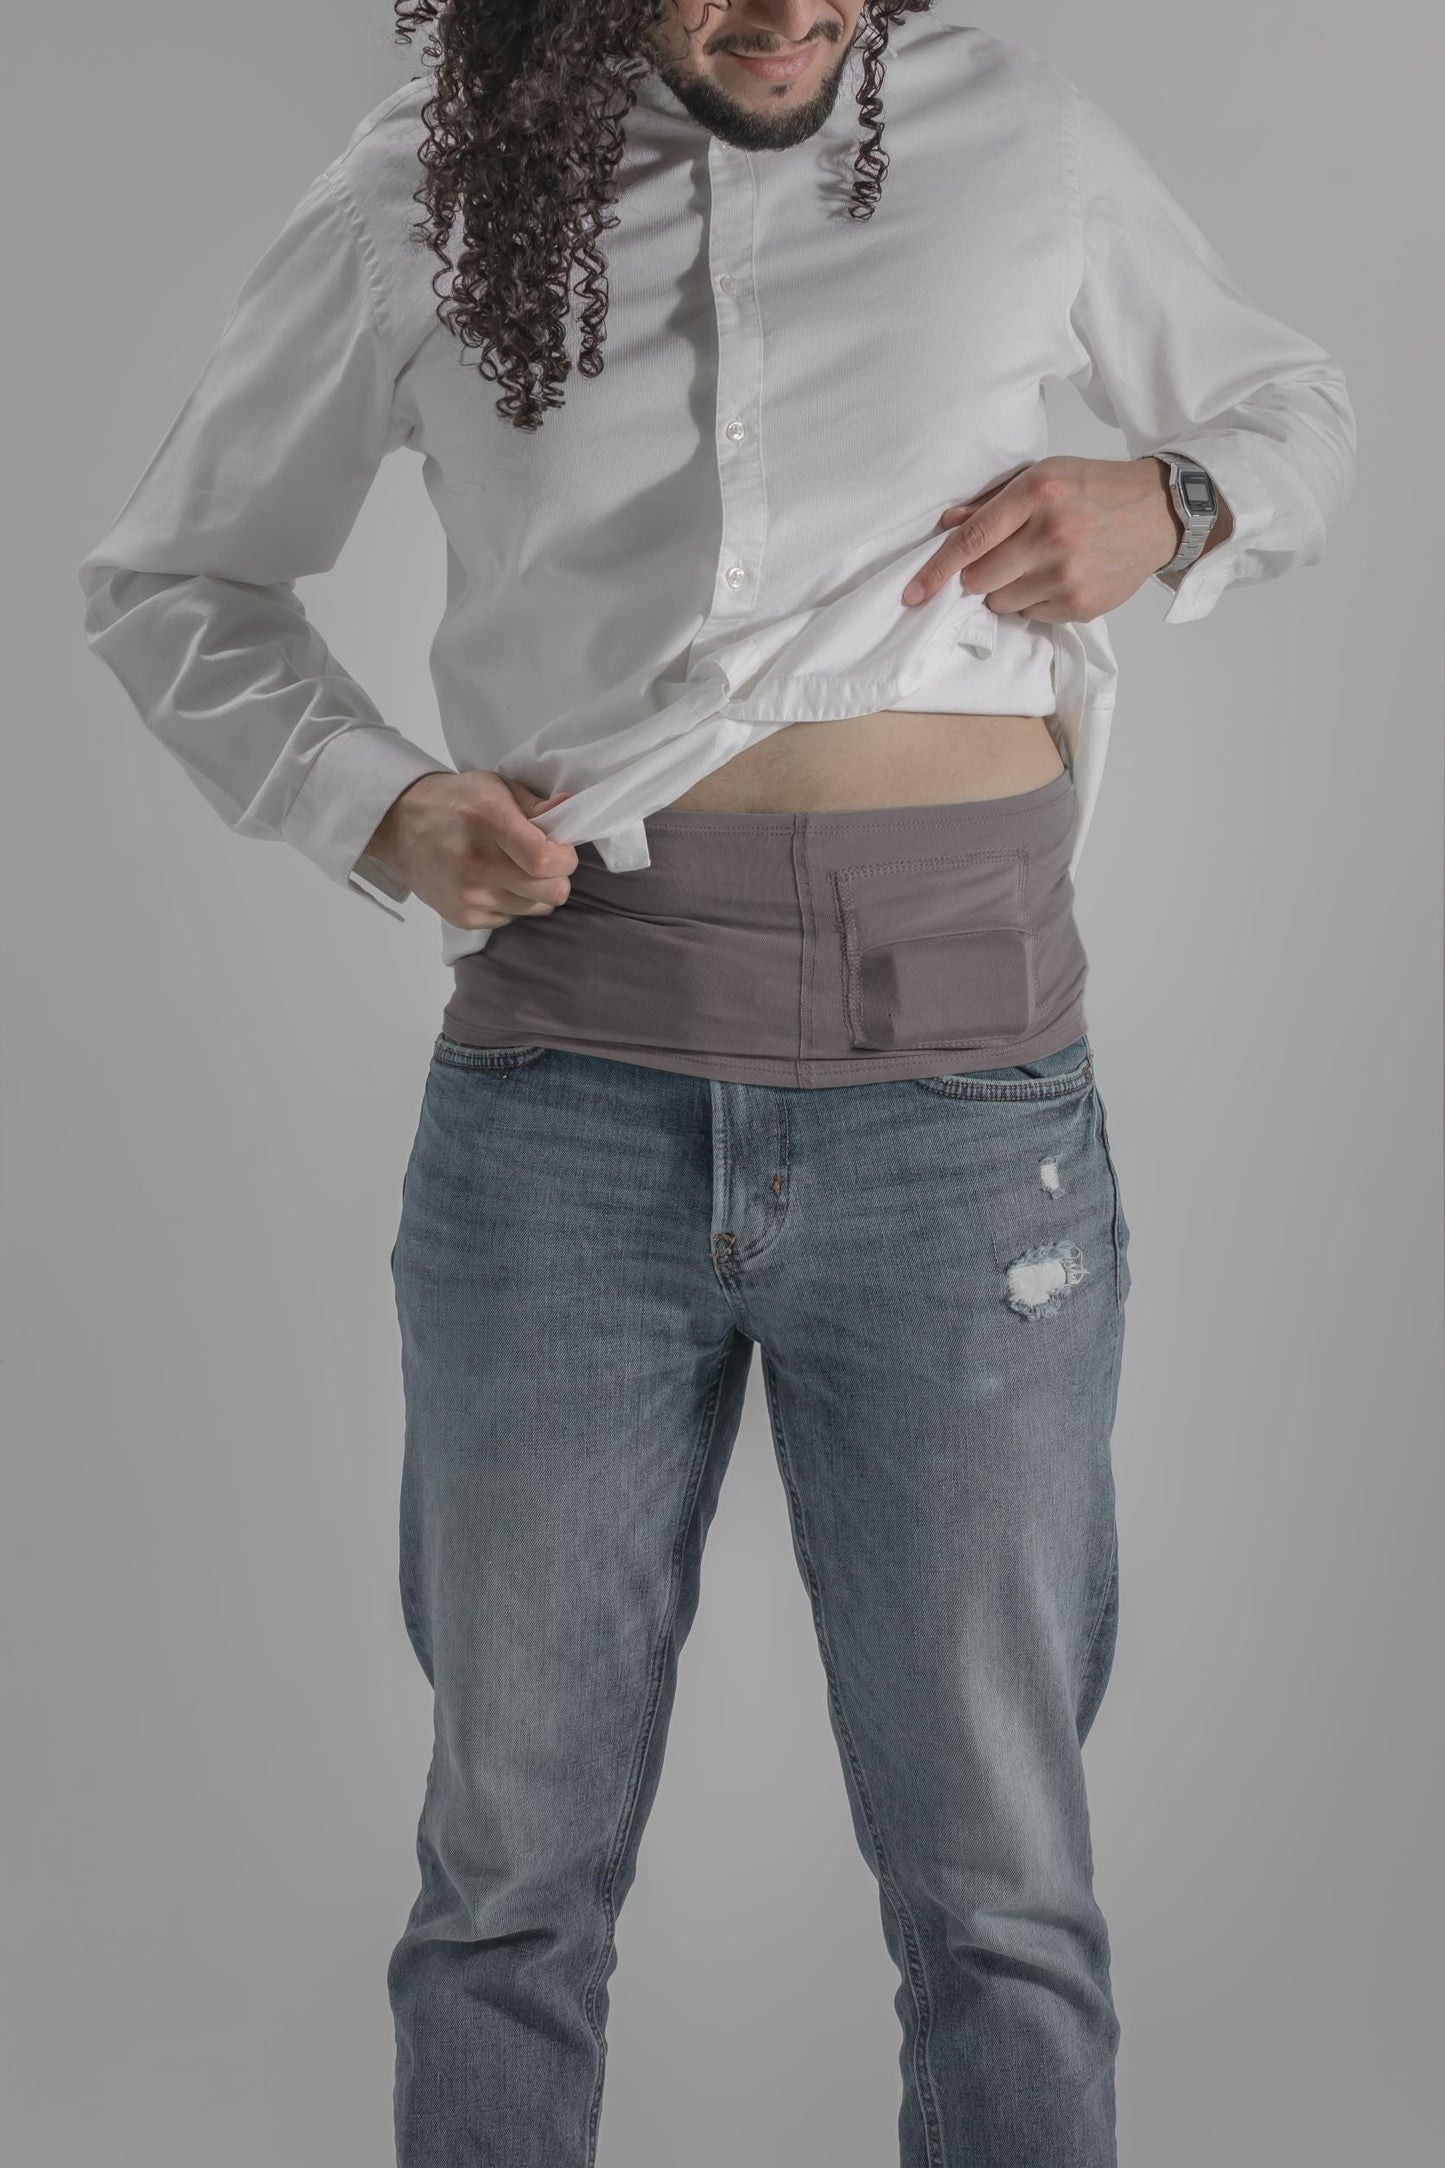 Universal Everyday Band with Insulin Pump Pocket